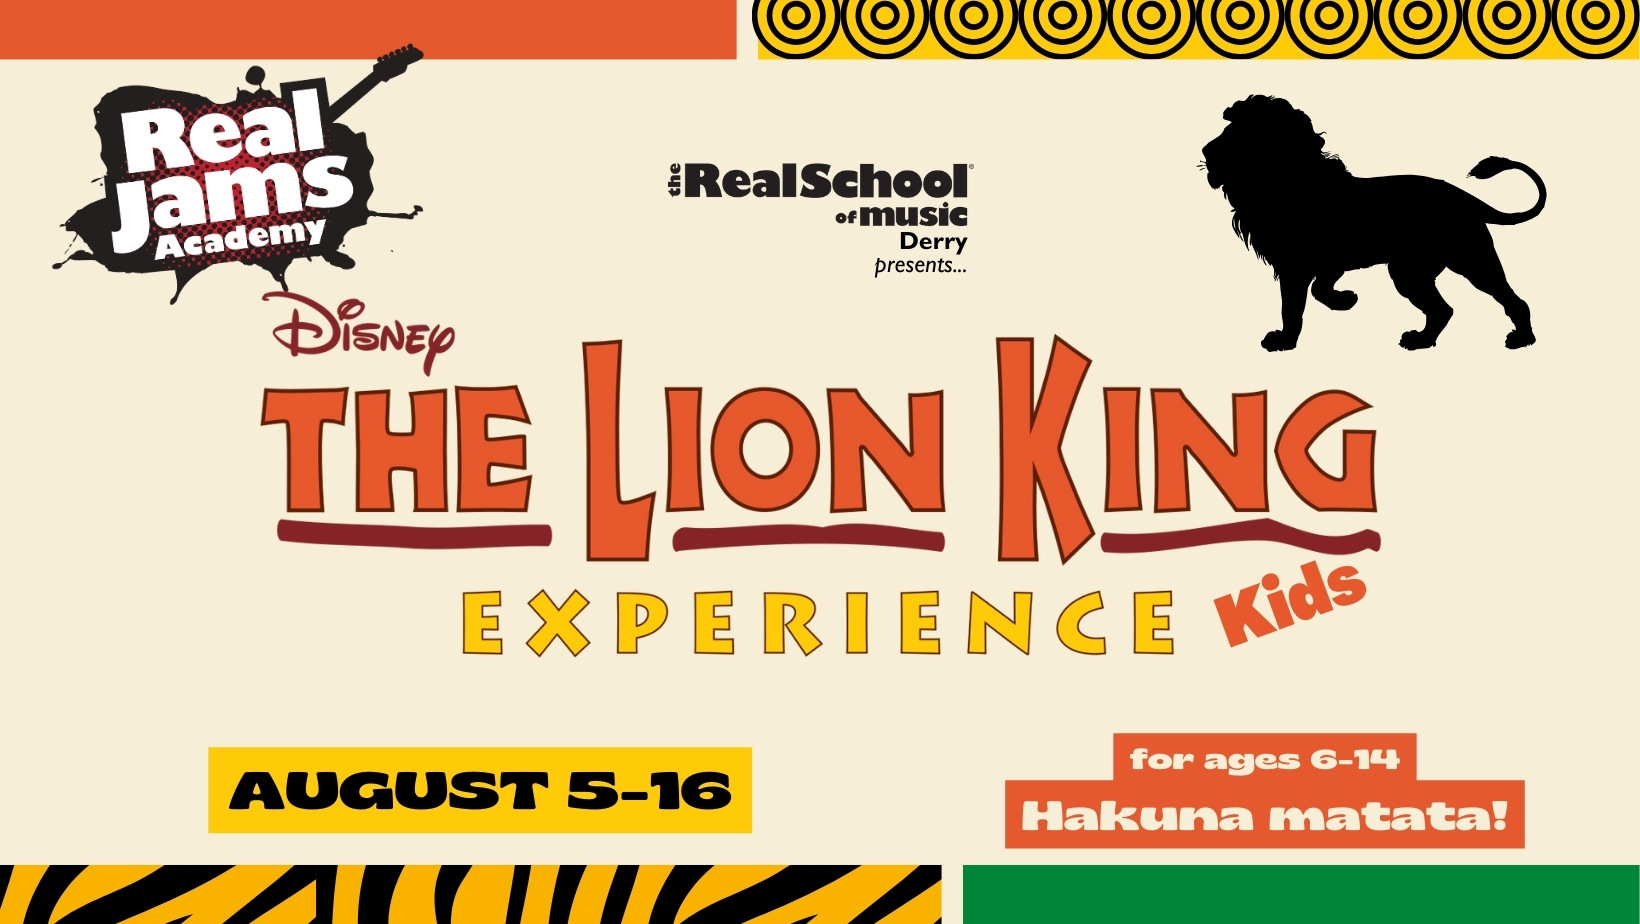 The Lion King Experience KIDS